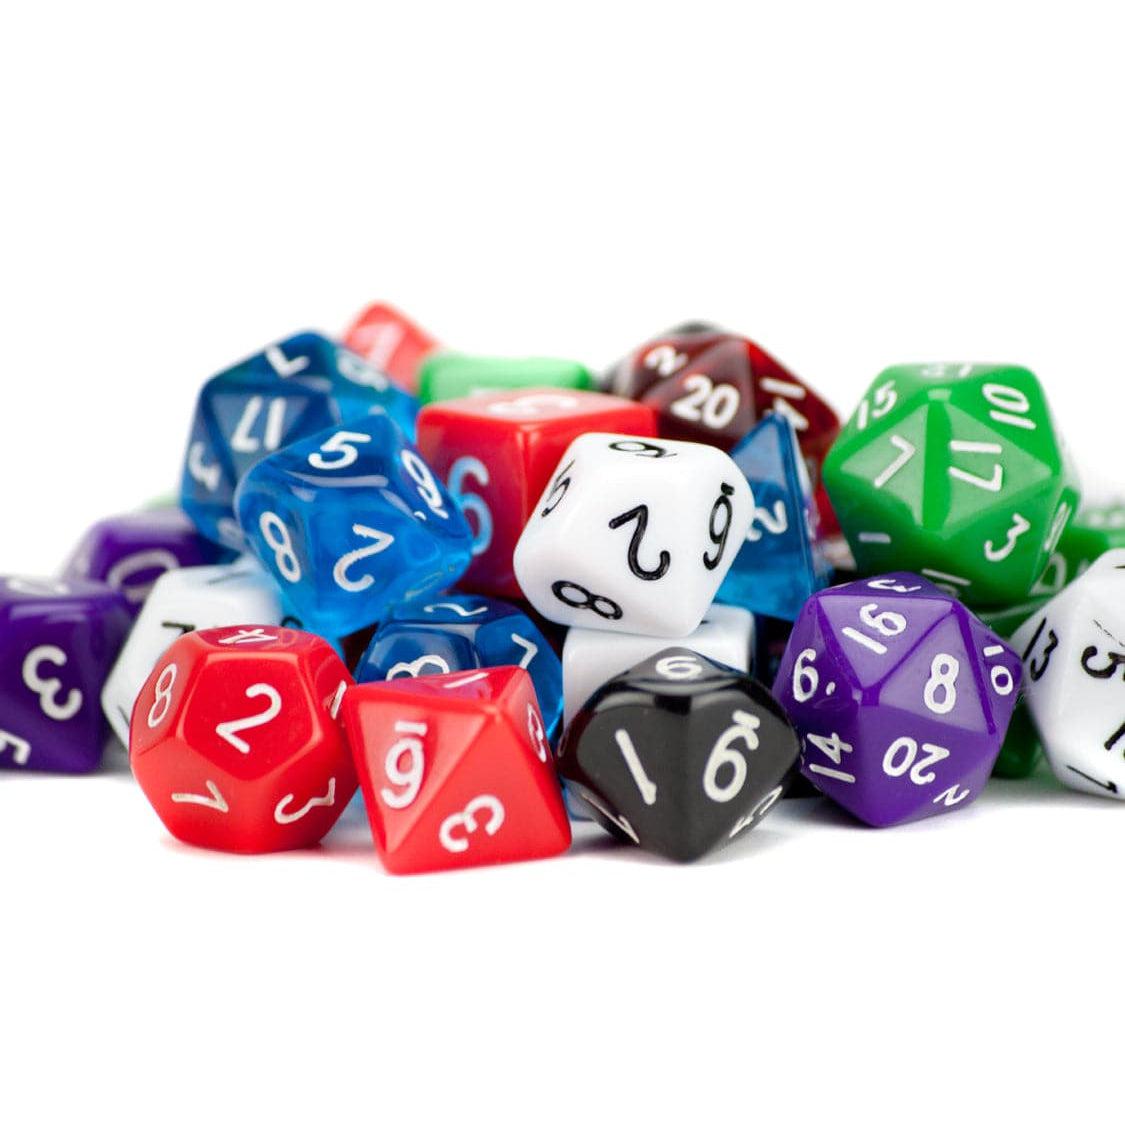 Legacy Dice-100+ Pack of Random D4 Polyhedral Dice in Multiple Colors-GDN4001-Legacy Toys